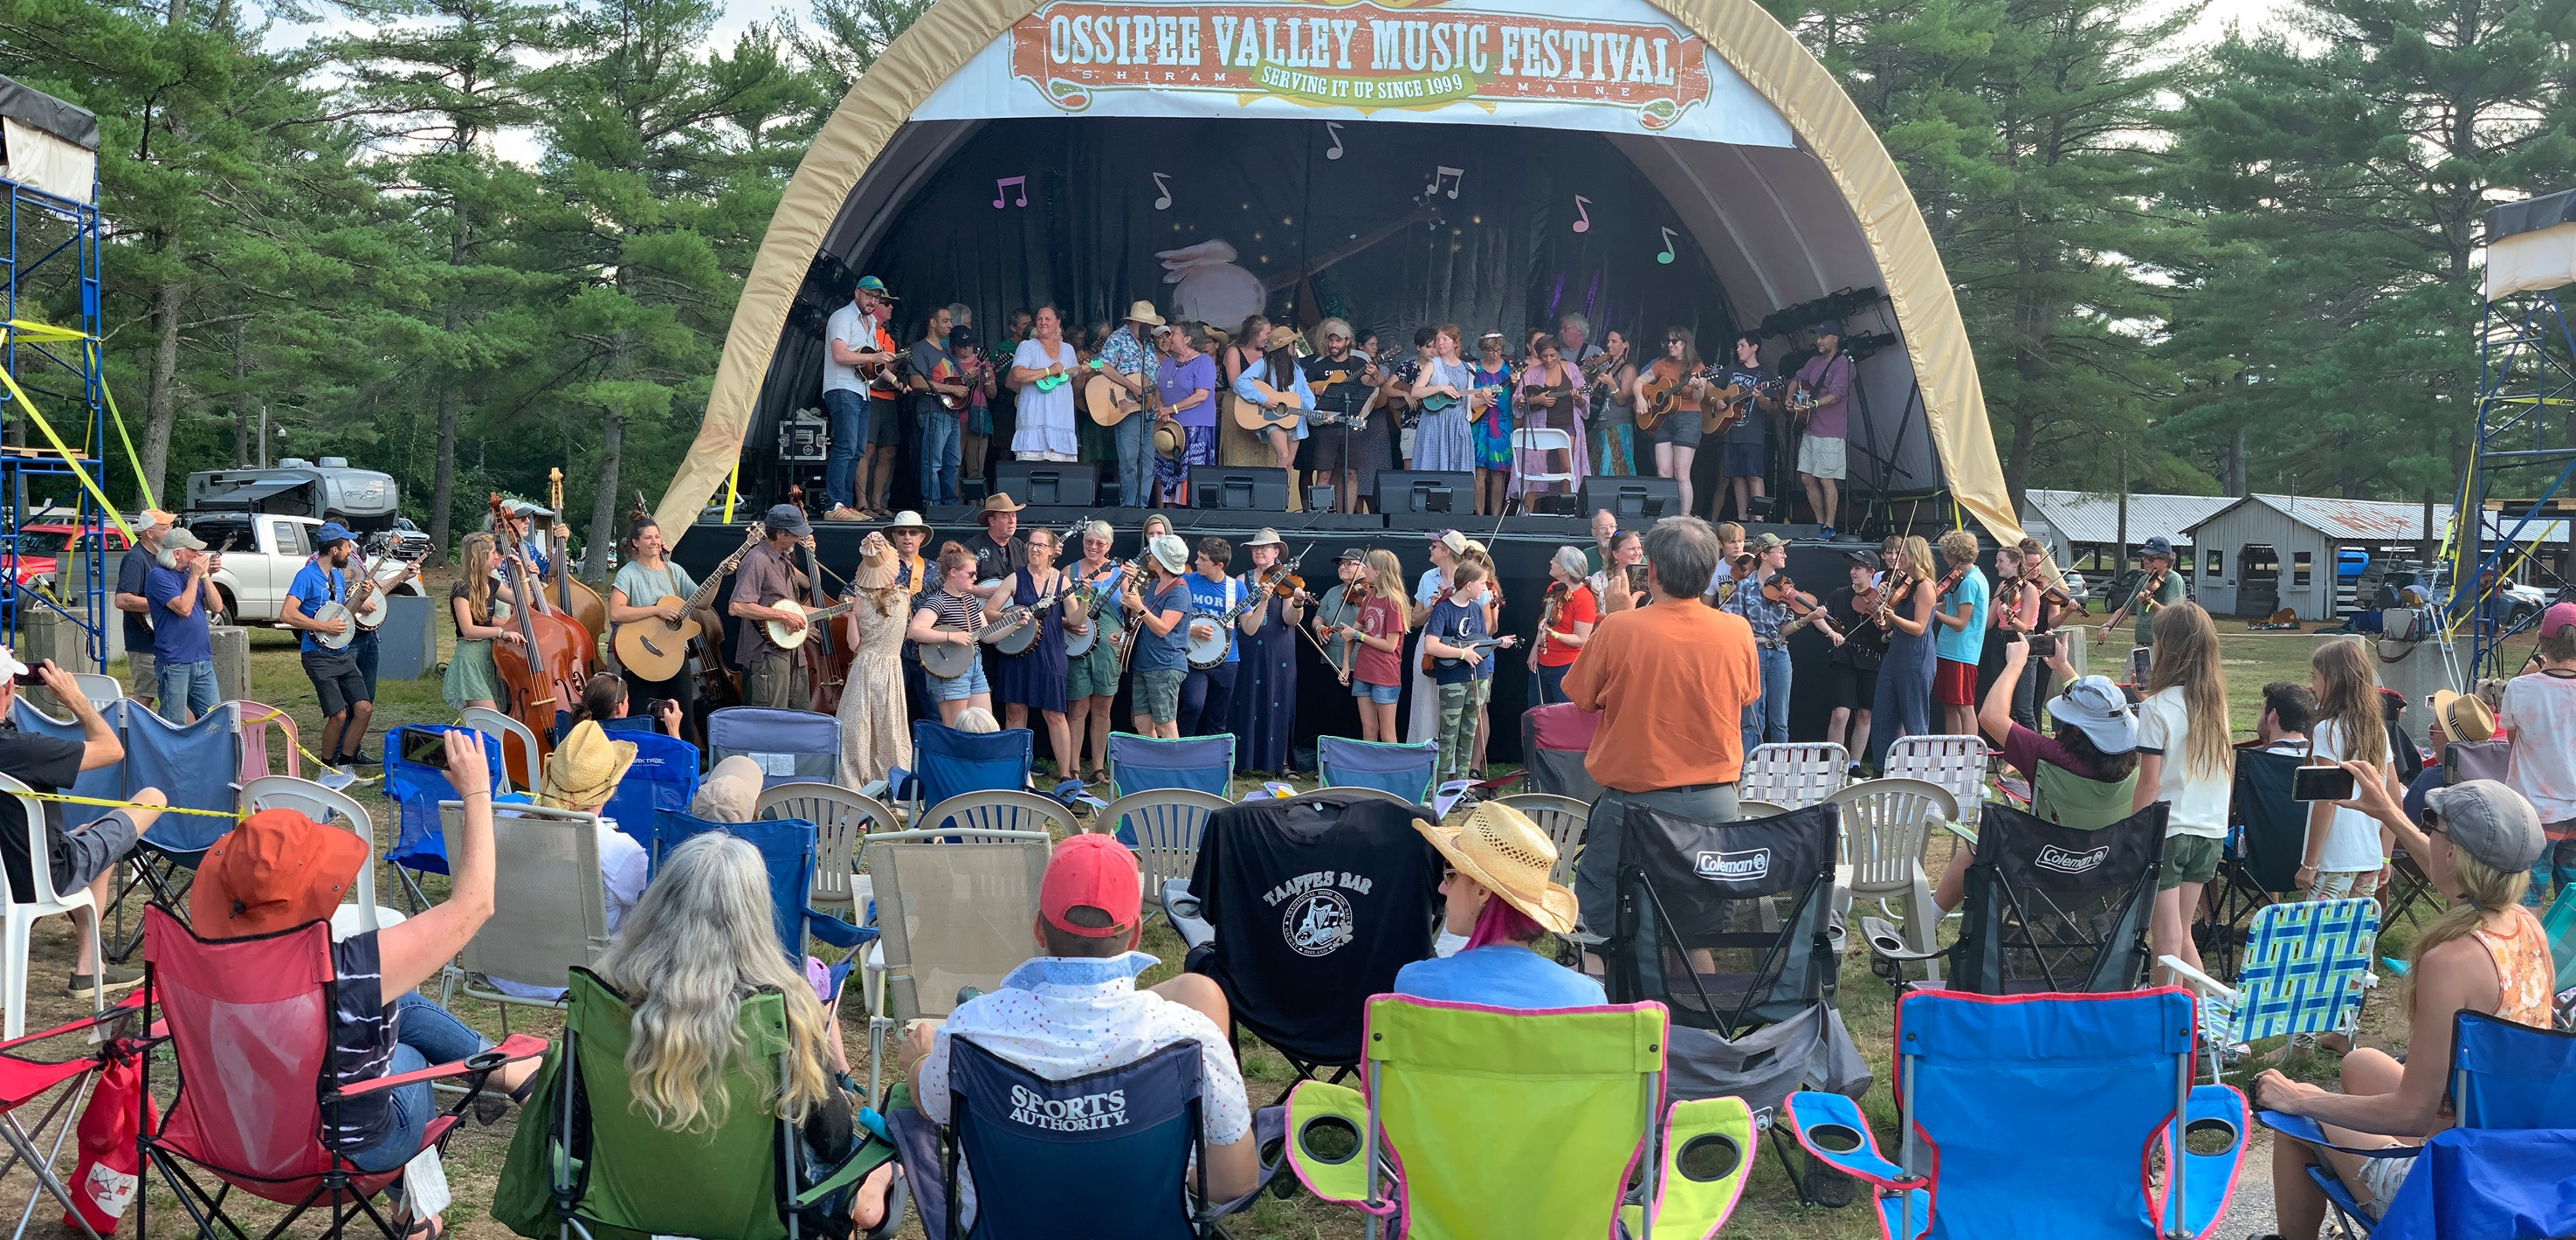 Ossipee Valley Music Festival, Hiram, ME Booking Information & Music